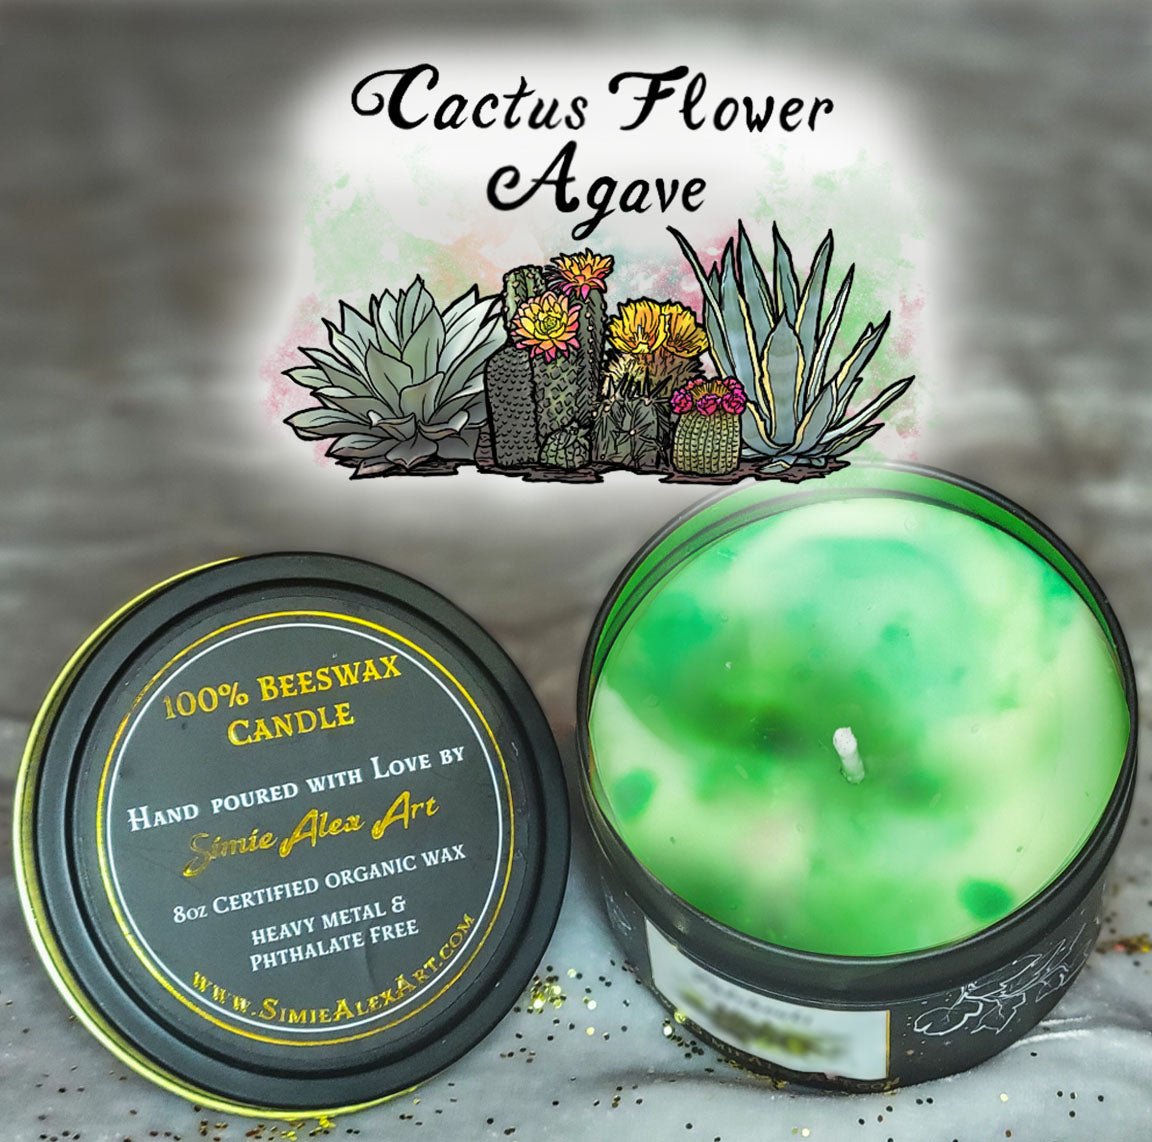 Cactus Flower Agave Beeswax Candle